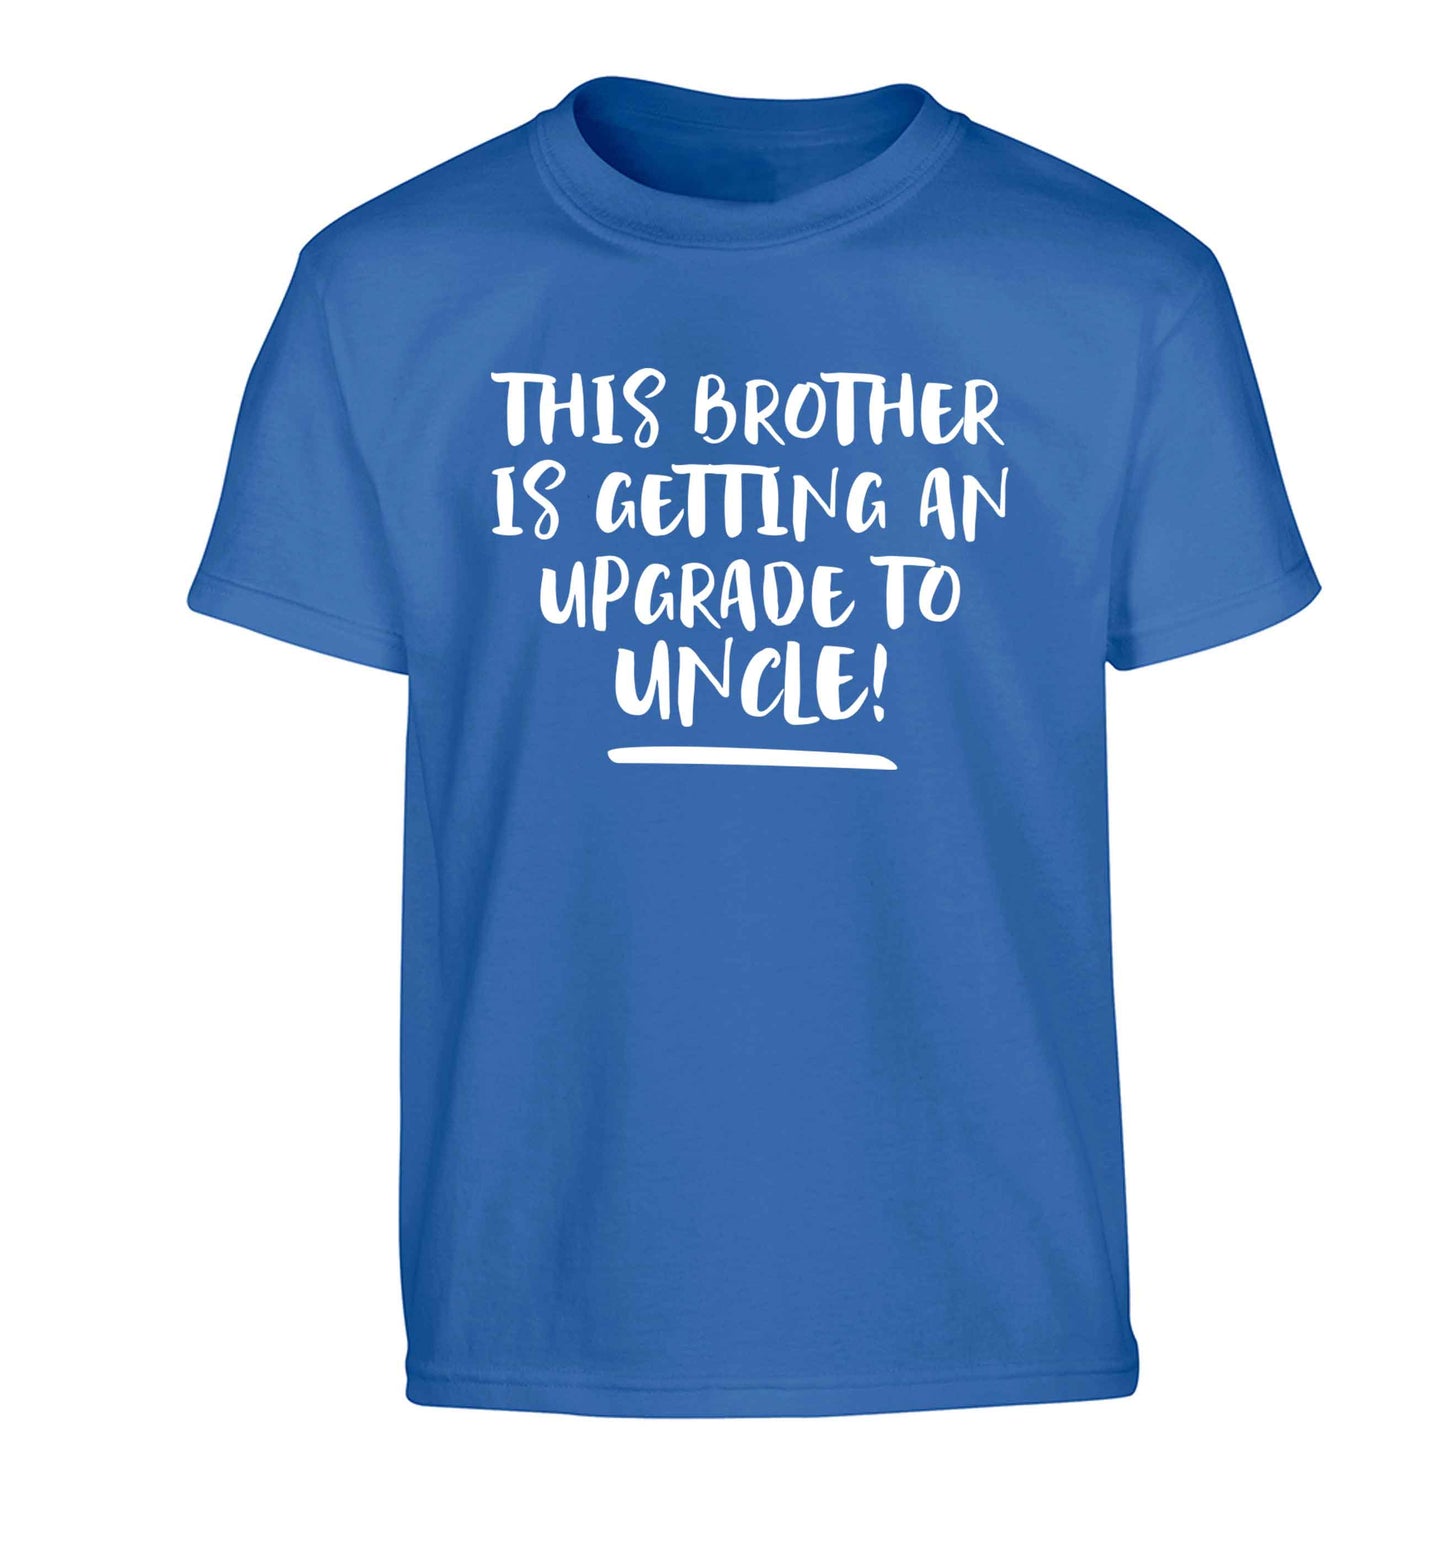 This brother is getting an upgrade to uncle! Children's blue Tshirt 12-13 Years